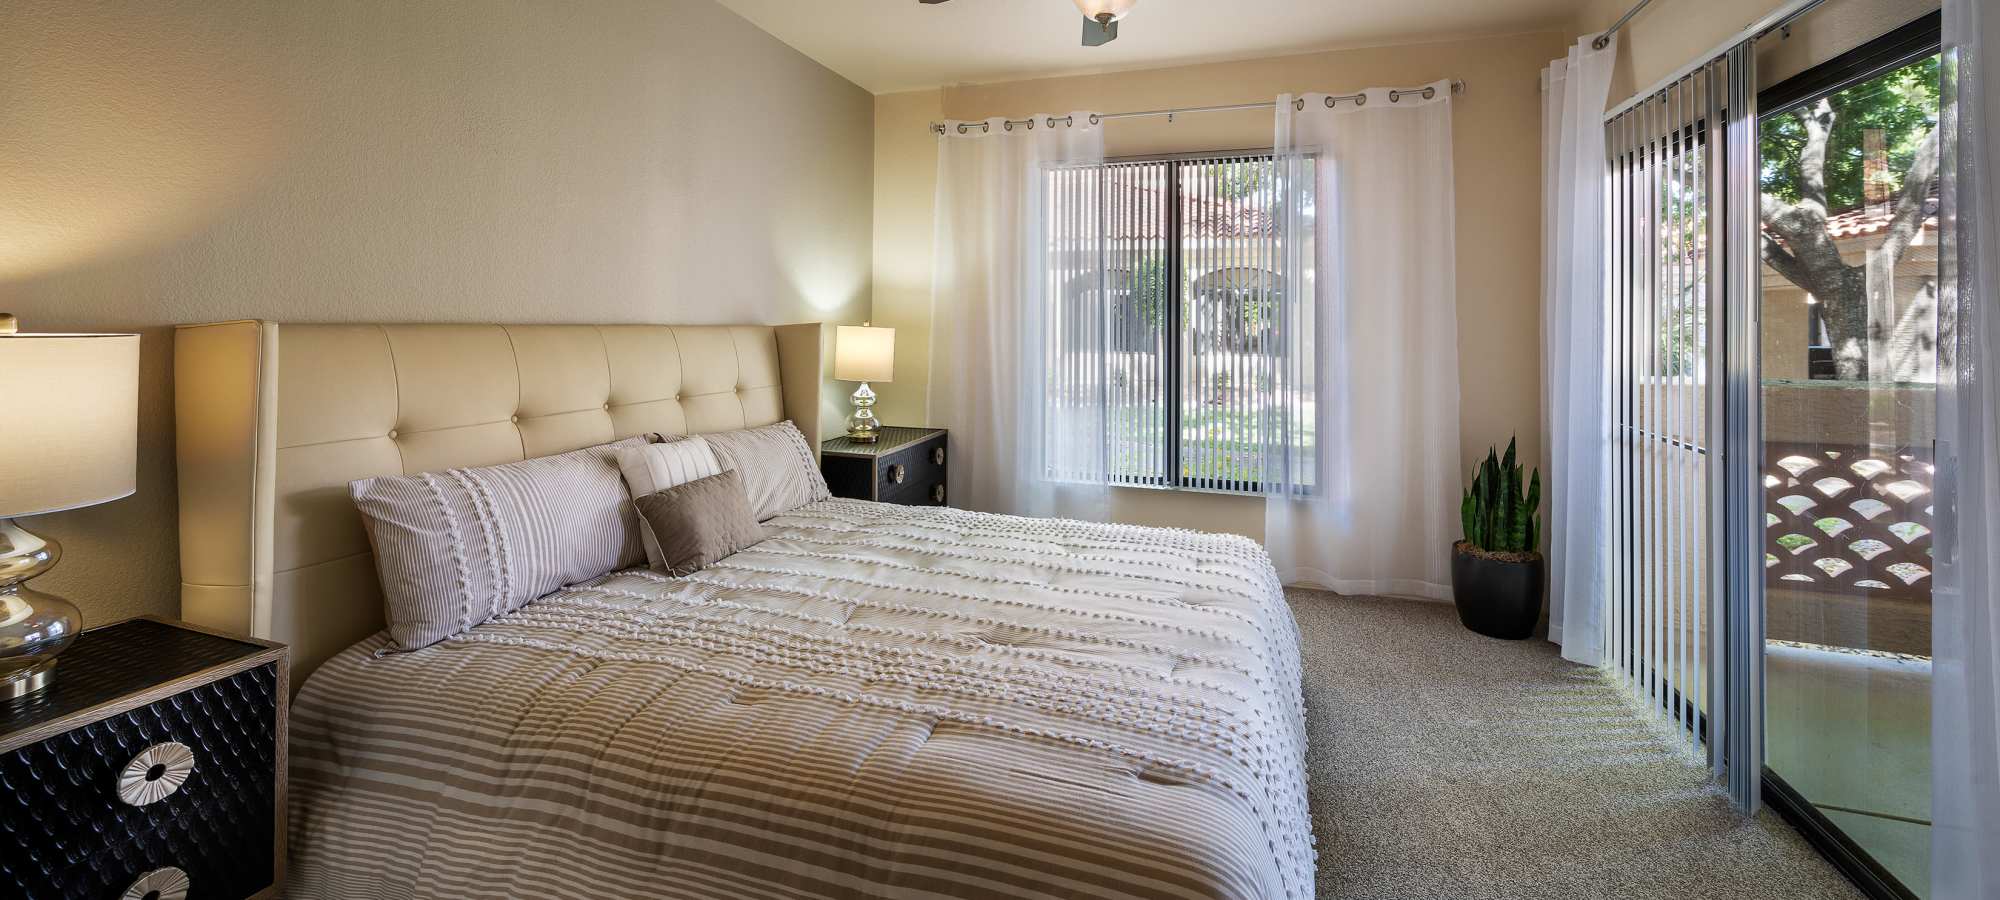 Luxuriously decorated master bedroom in a model home at San Palmilla in Tempe, Arizona